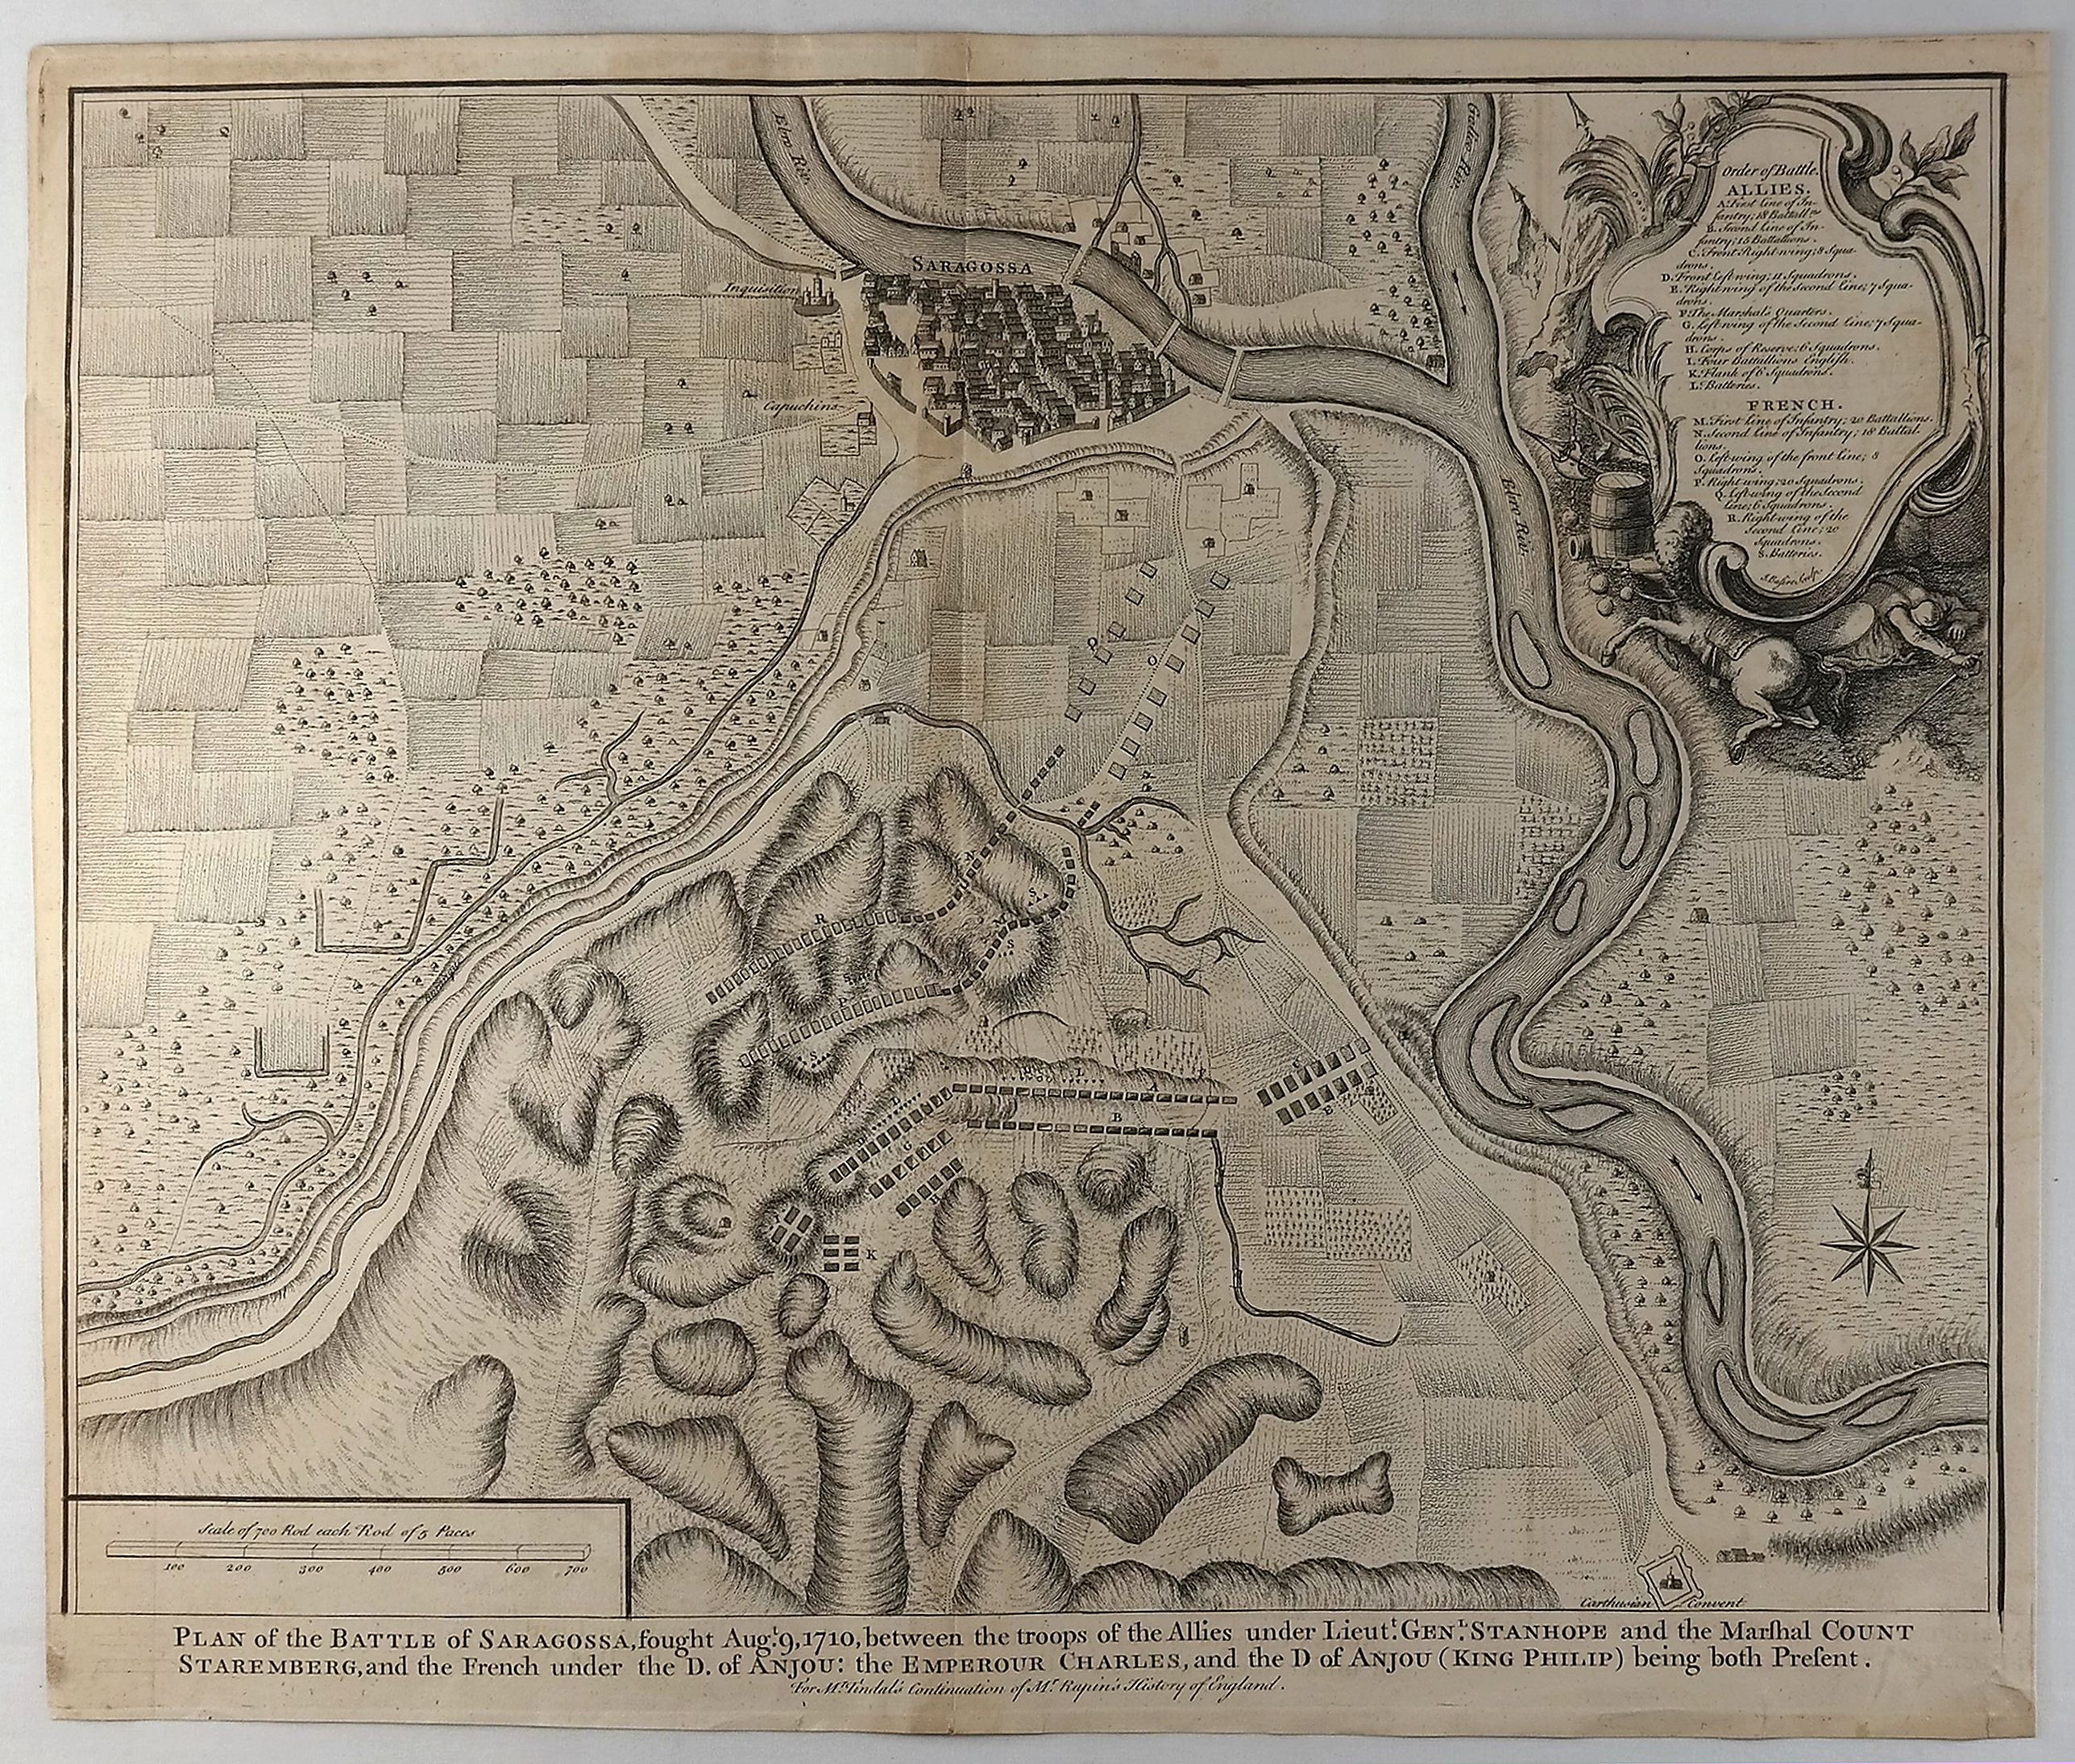 Plan Of The Battle Of Saragossa, Fought Aug, 9. 1710, Between The Troops Of The Allies Under Lieut. Genl. Stanhope And The Marshal Count Staremberg, And The French Under The D. Of Anjou 